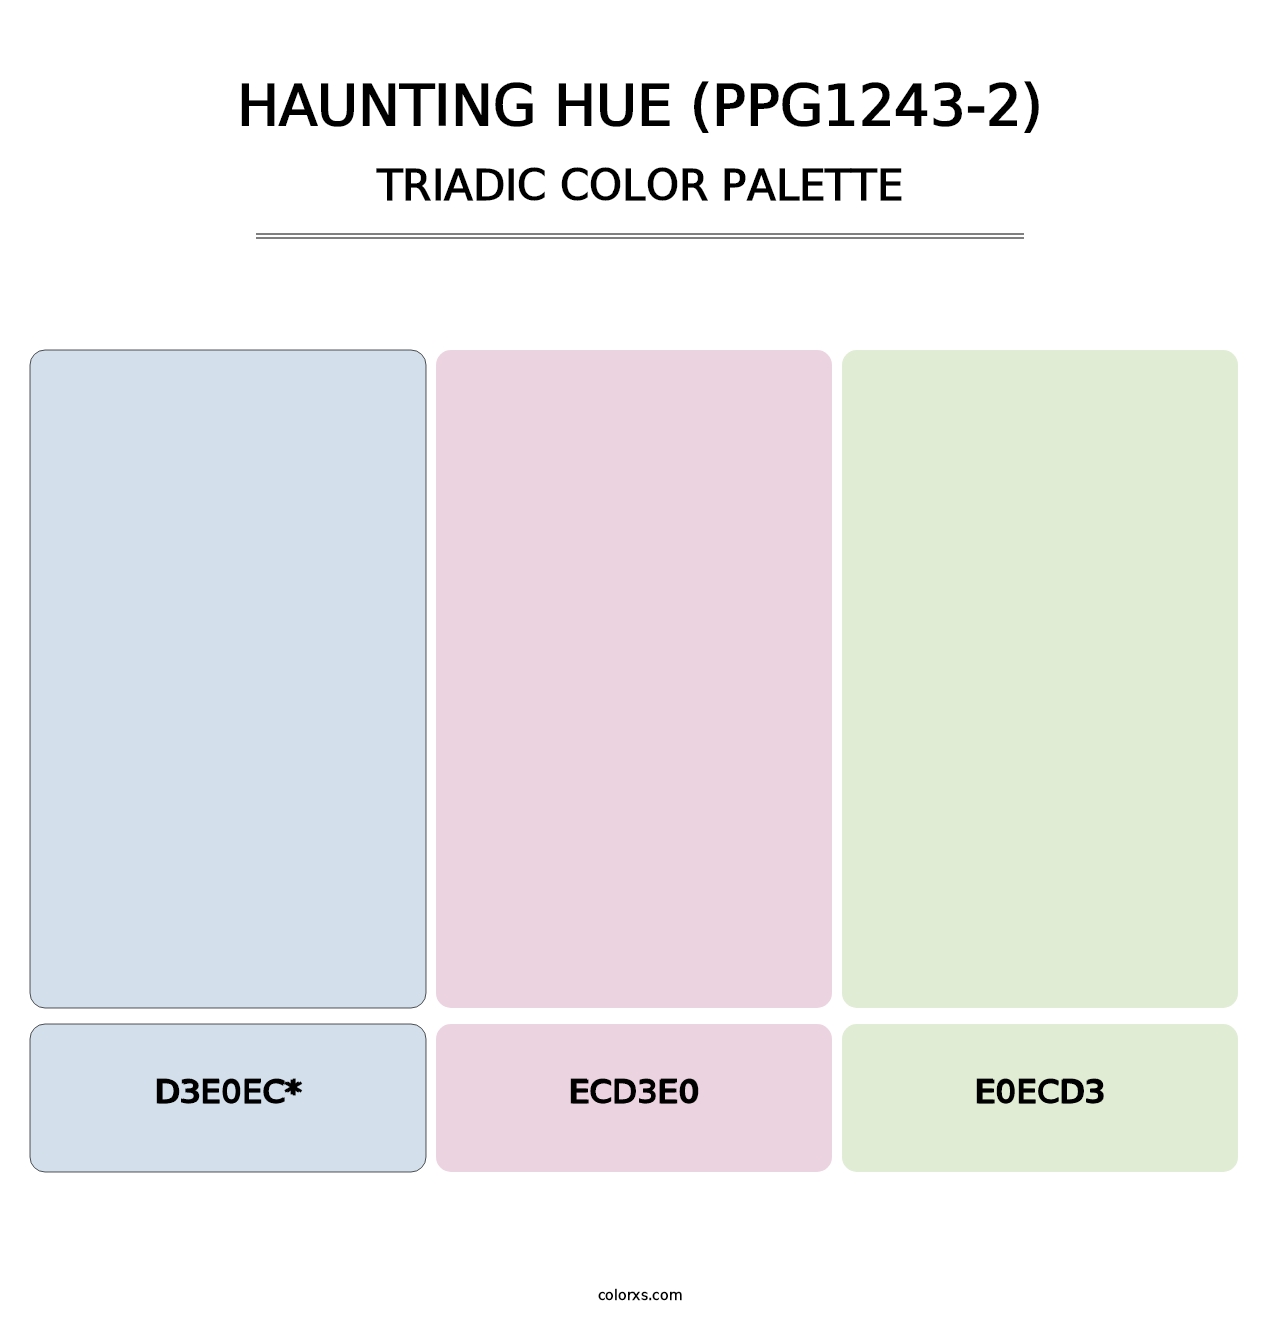 Haunting Hue (PPG1243-2) - Triadic Color Palette